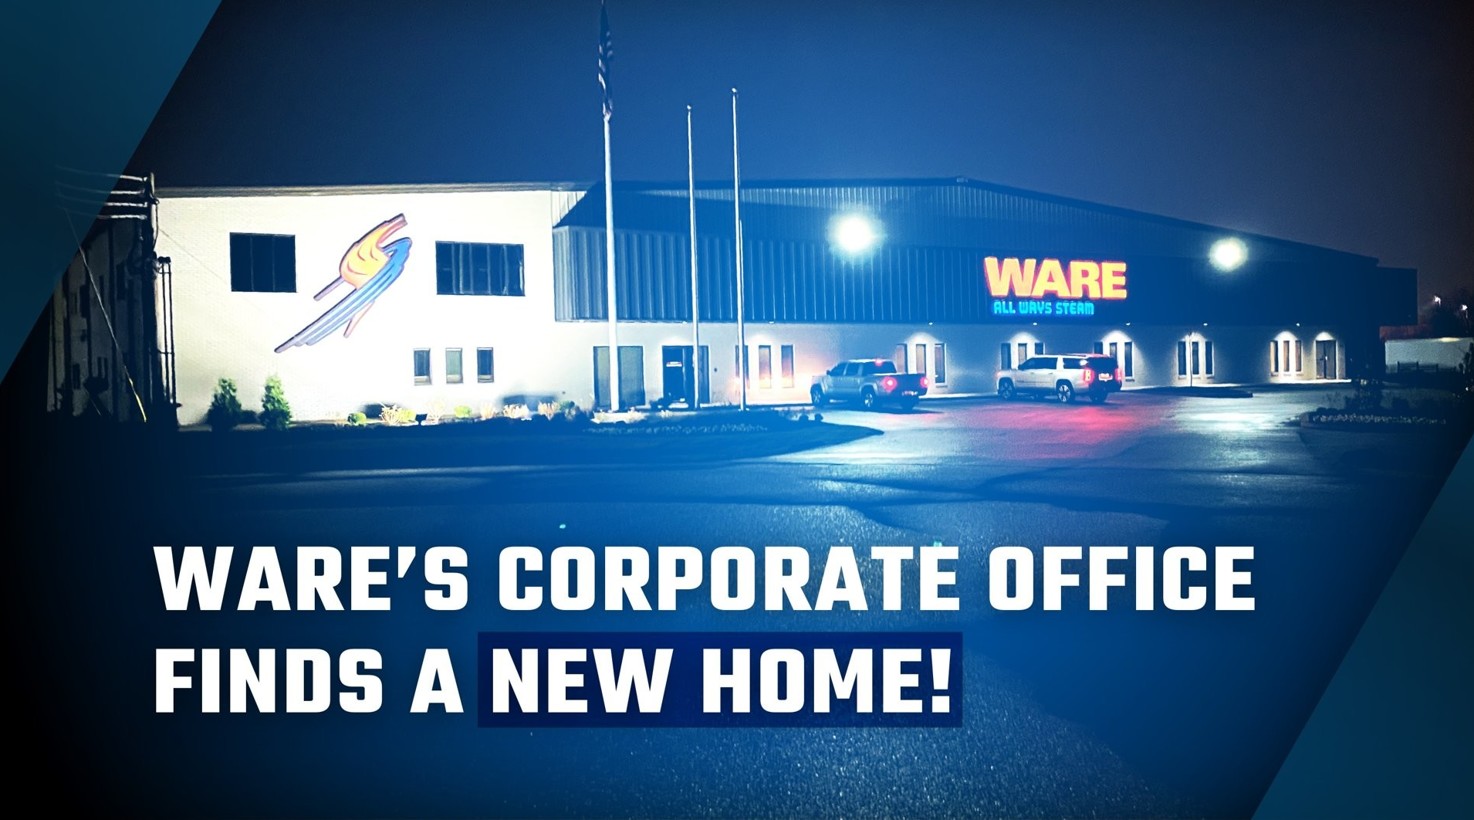 WARE’s Corporate Office Finds a New Home